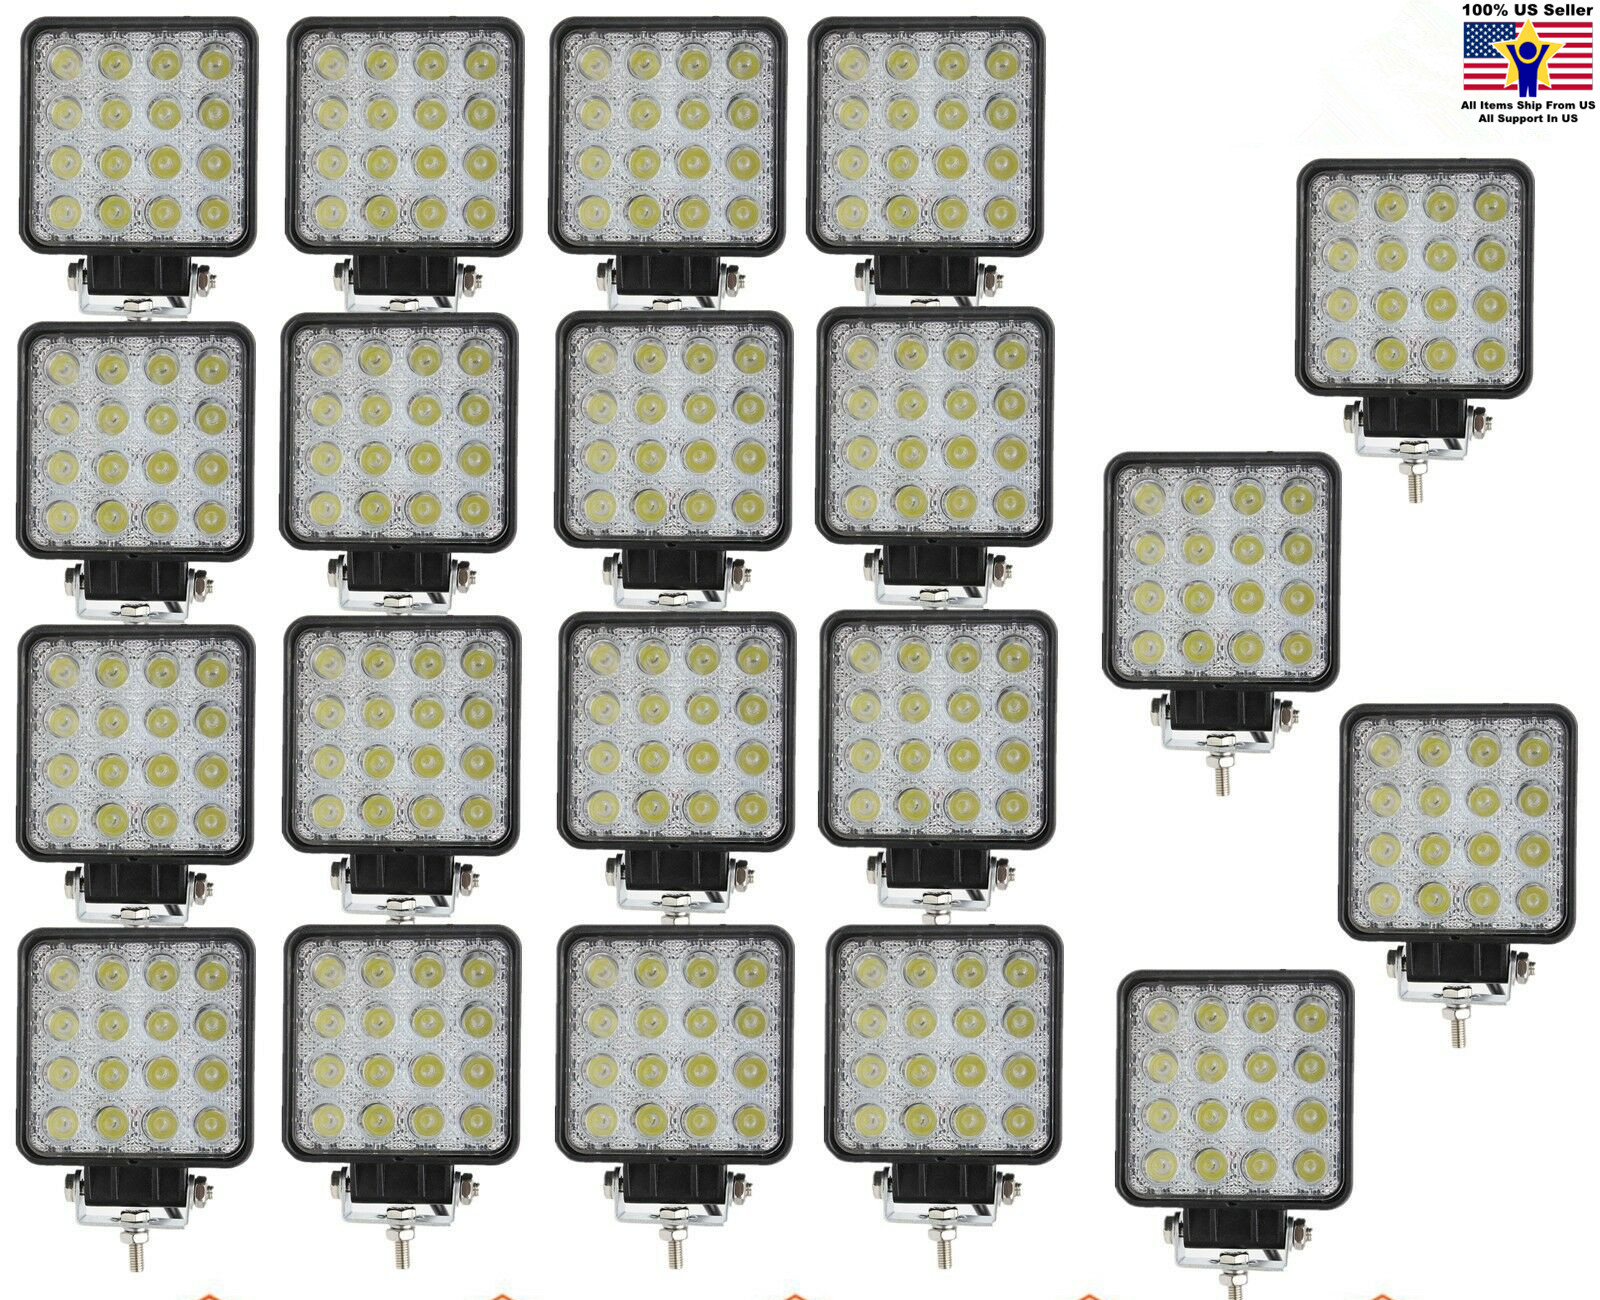 20x 48W Flood LED Off road Work Light Lamp Boat Truck Driving Lamp UTE Jeep